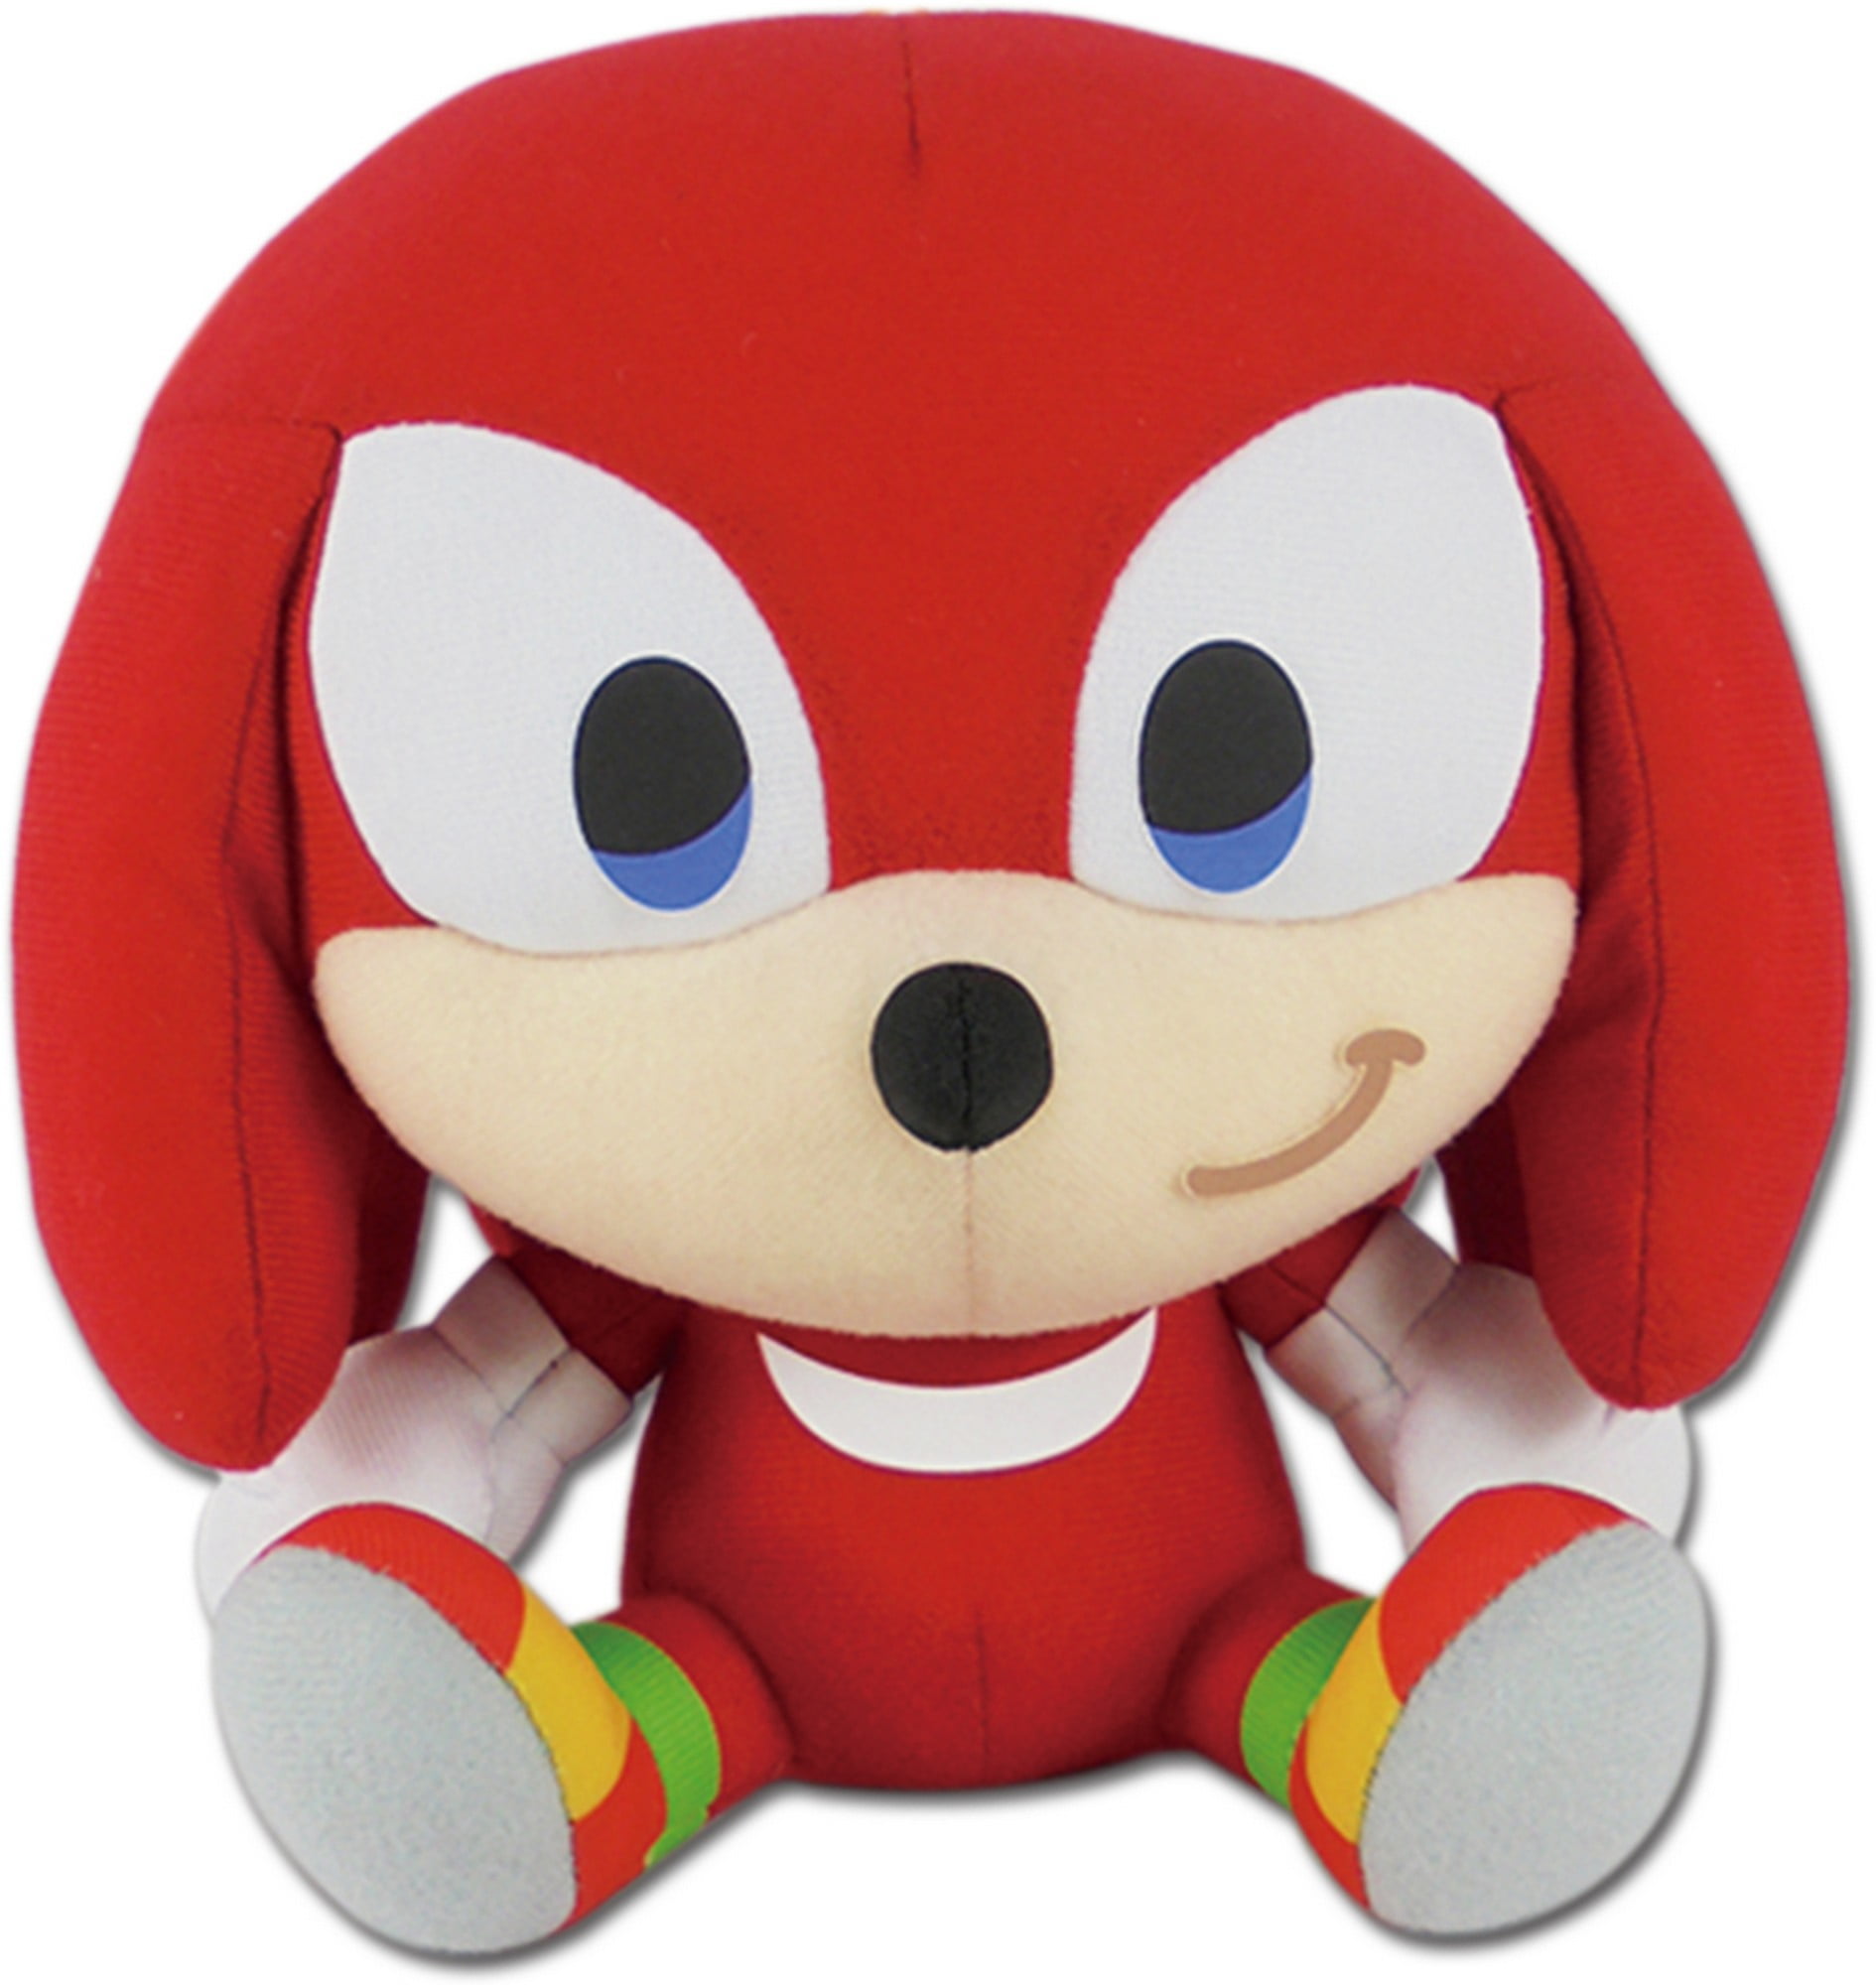 Sega Sonic The Hedgehog Video Game Knuckles Red 12" Plush Stuffed Figure Toy 